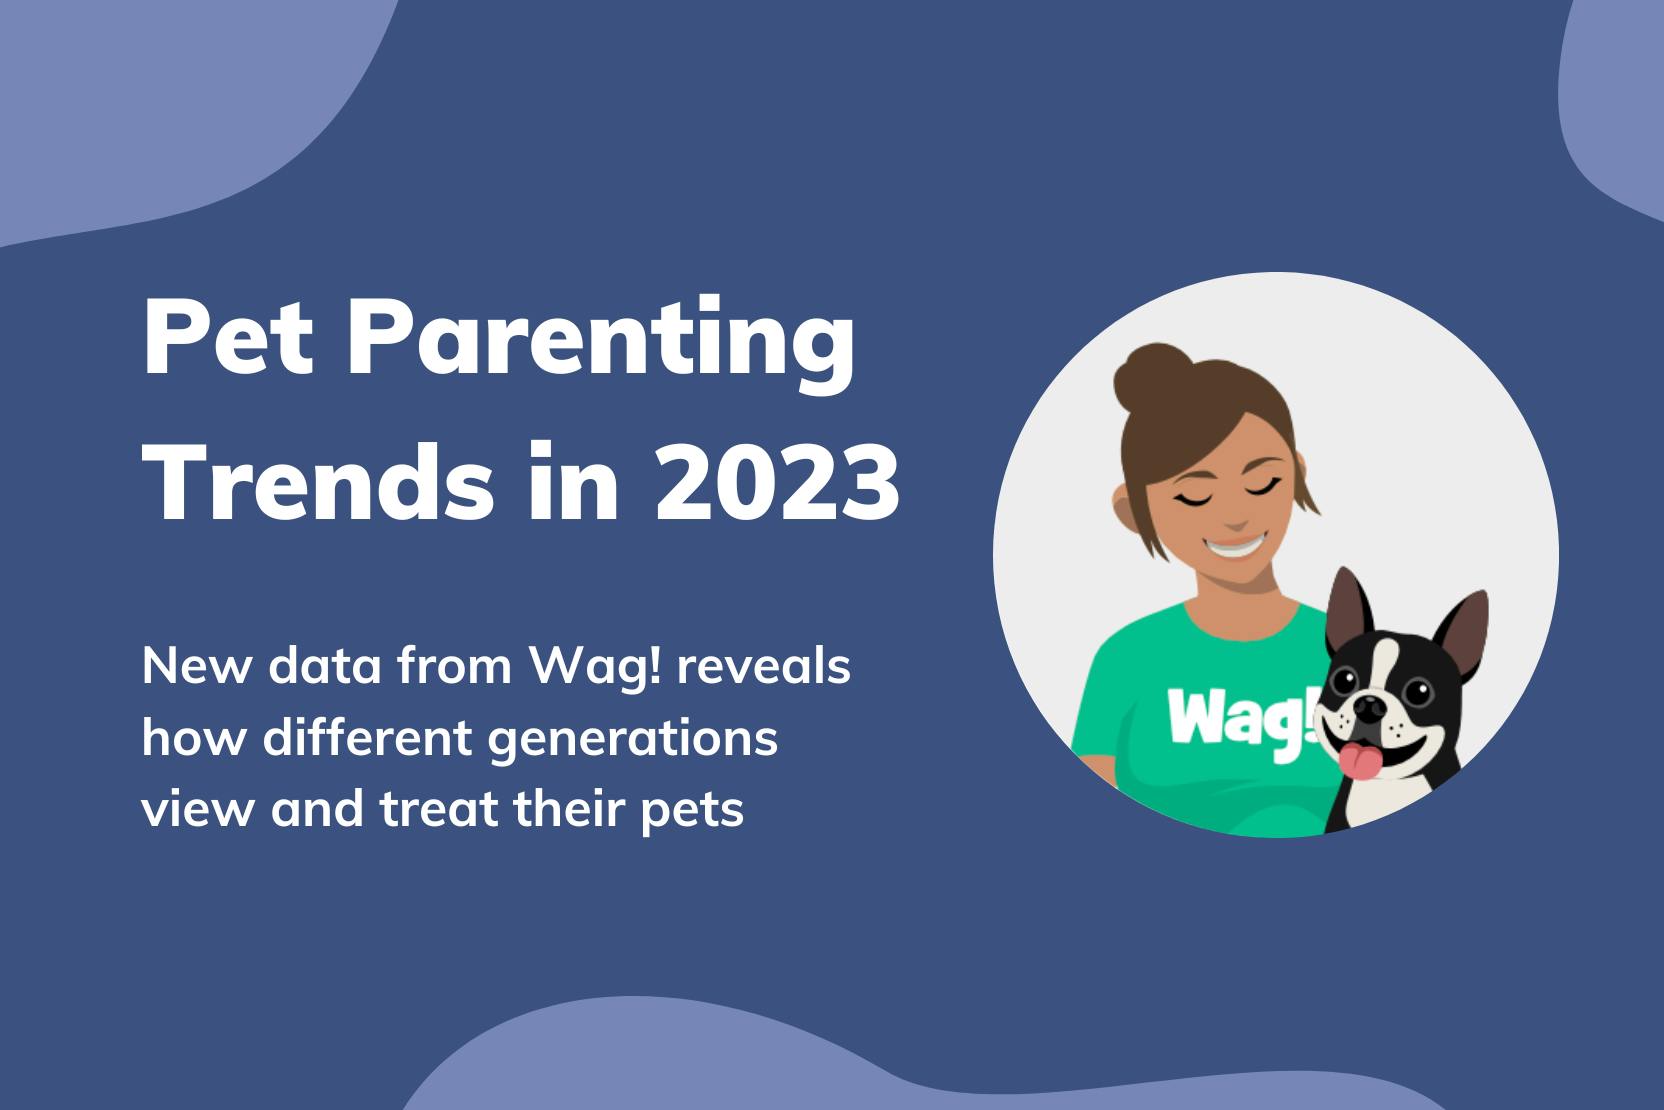 daily-wag-new-wag-survey-the-state-of-pet-parenting-in-2023-hero-image